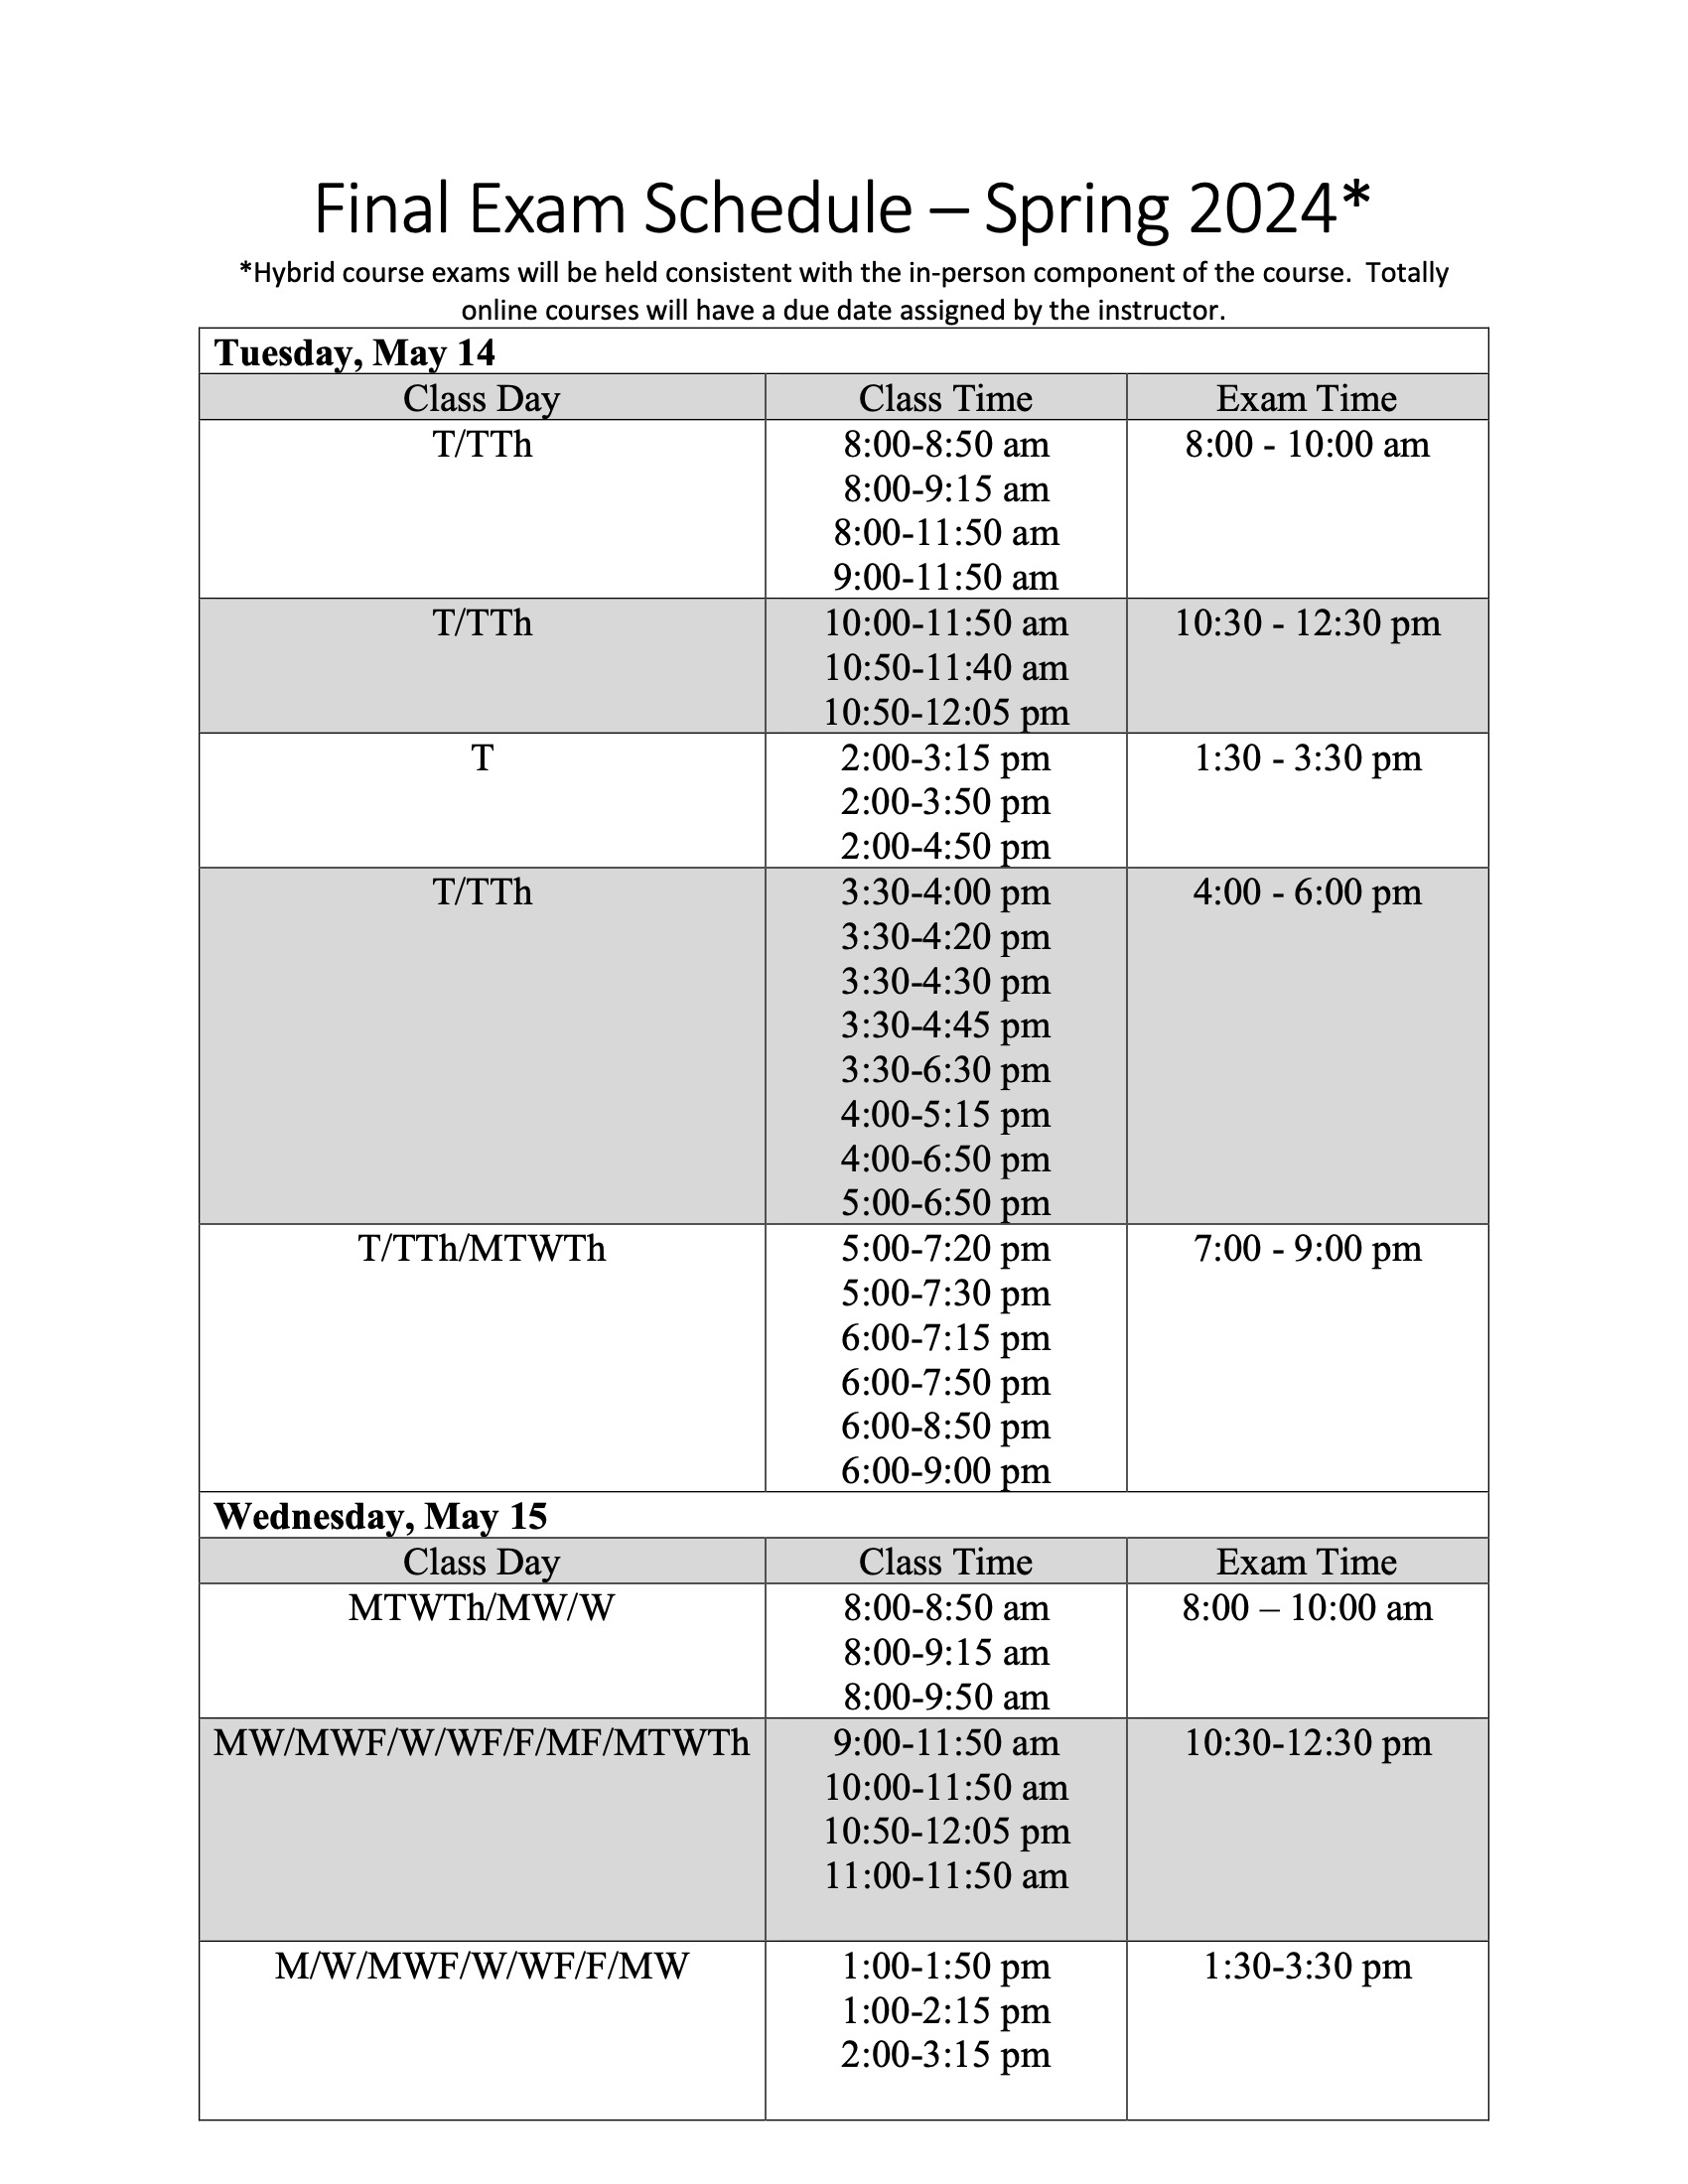 Final Exam Schedule – Spring 2024*
*Hybrid course exams will be held consistent with the in-person component of the course. Totally online courses will have a due date assigned by the instructor.
Tuesday, May 14
Class Day
Class Time
Exam Time
T/TTh
8:00-8:50 am
8:00-9:15 am 8:00-11:50 am 9:00-11:50 am
8:00 - 10:00 am
T/TTh
10:00-11:50 am 10:50-11:40 am 10:50-12:05 pm
10:30 - 12:30 pm
T
2:00-3:15 pm 2:00-3:50 pm 2:00-4:50 pm
1:30 - 3:30 pm
T/TTh
3:30-4:00 pm 3:30-4:20 pm 3:30-4:30 pm 3:30-4:45 pm 3:30-6:30 pm 4:00-5:15 pm 4:00-6:50 pm 5:00-6:50 pm
4:00 - 6:00 pm
T/TTh/MTWTh
5:00-7:20 pm 5:00-7:30 pm 6:00-7:15 pm 6:00-7:50 pm 6:00-8:50 pm 6:00-9:00 pm
7:00 - 9:00 pm
Wednesday, May 15
Class Day
Class Time
Exam Time
MTWTh/MW/W
8:00-8:50 am 8:00-9:15 am 8:00-9:50 am
8:00 – 10:00 am
MW/MWF/W/WF/F/MF/MTWTh
9:00-11:50 am 10:00-11:50 am 10:50-12:05 pm 11:00-11:50 am
10:30-12:30 pm
M/W/MWF/W/WF/F/MW
1:00-1:50 pm 1:00-2:15 pm 2:00-3:15 pm
1:30-3:30 pm